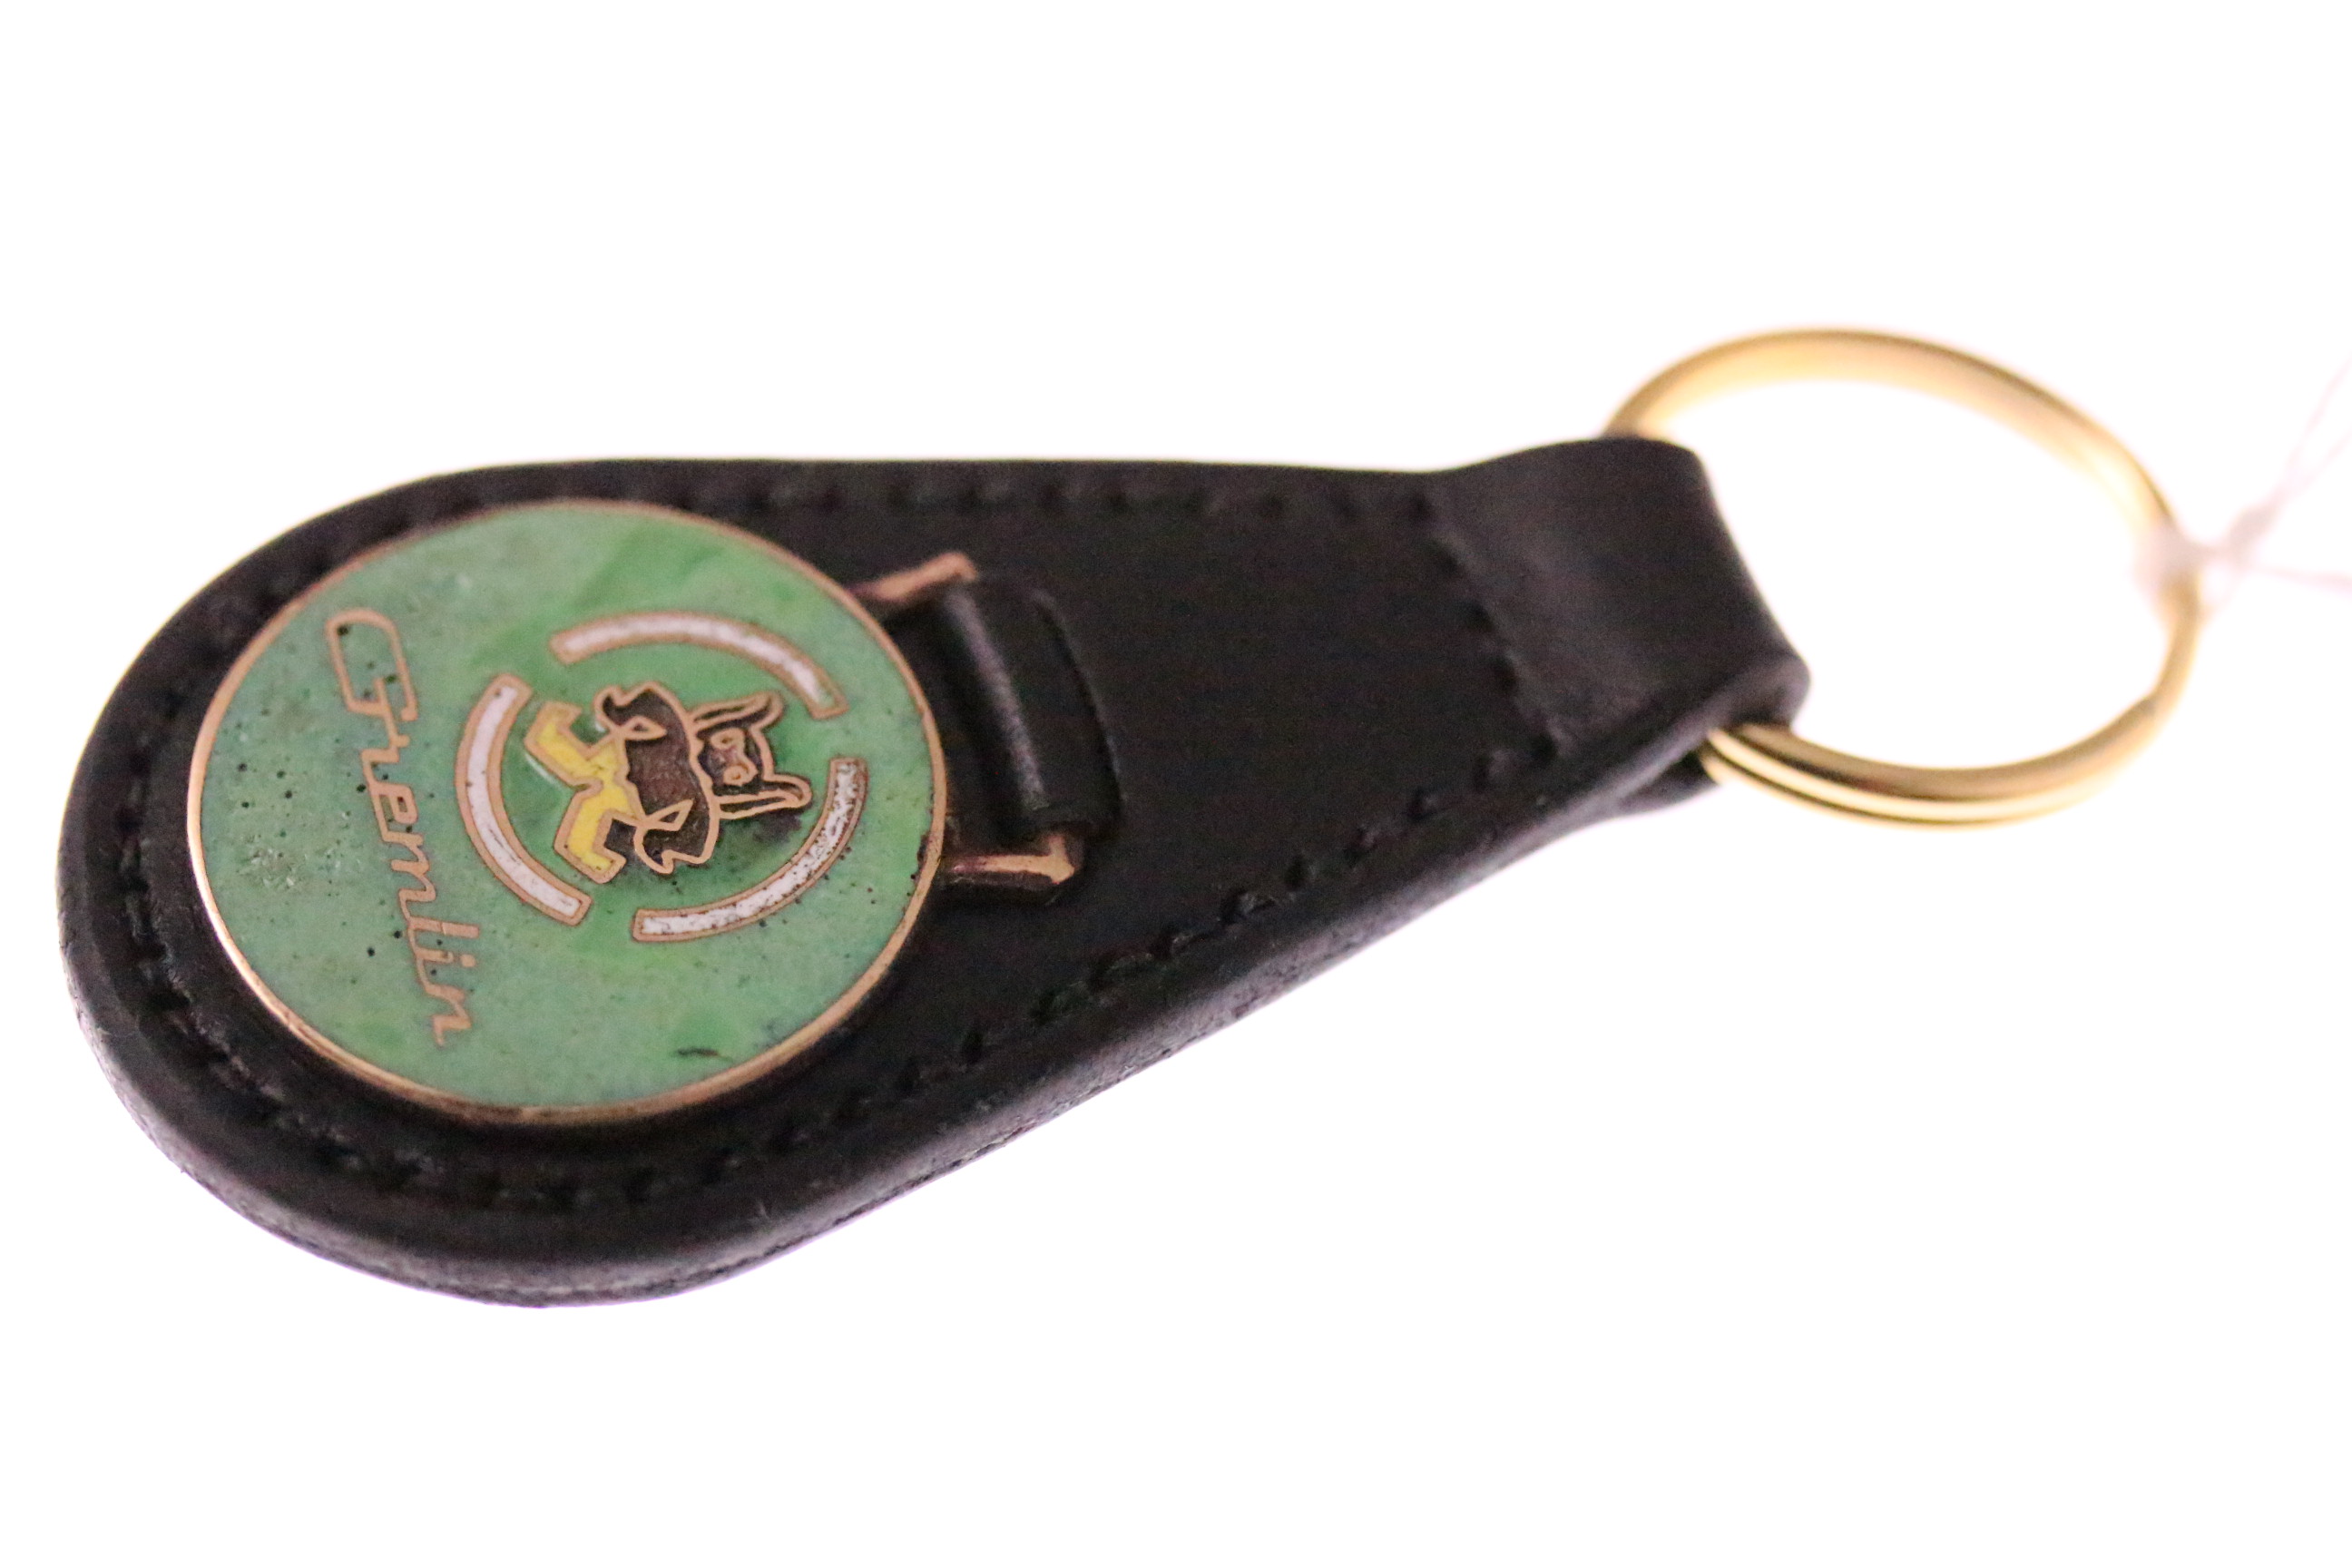 Details about   Vintage AM Bullseye American Motors Corp #3317 Leather Key Ring 1984 1985 1986 